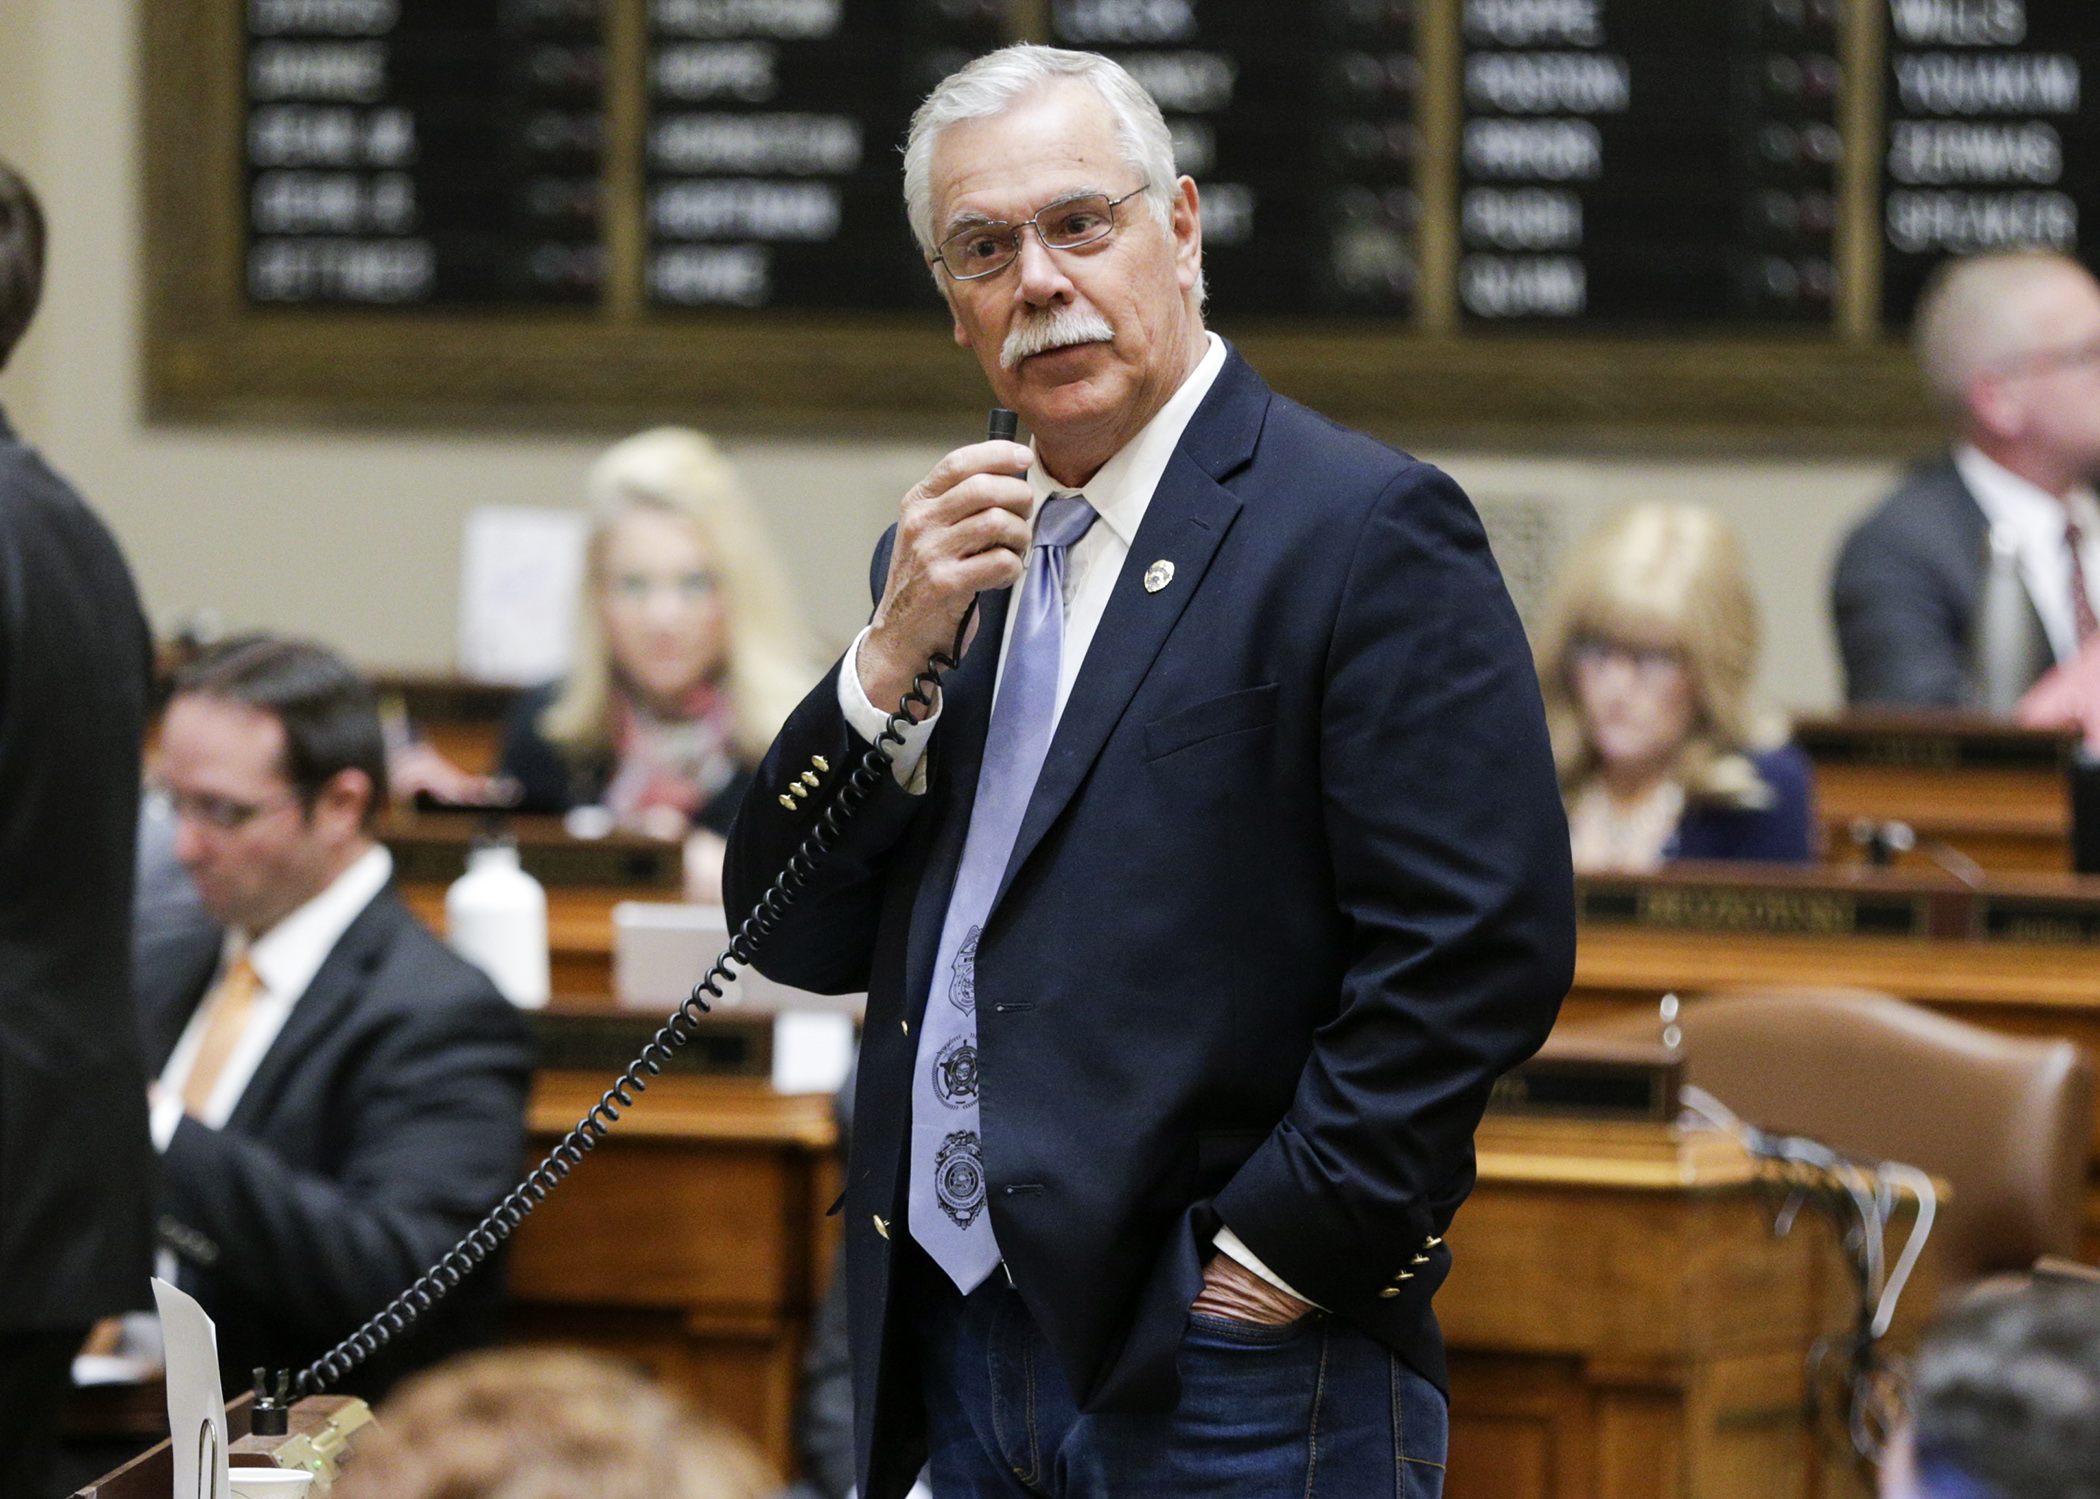 Rep. Tony Cornish, chair of the House Public Safety and Security Policy and Finance Committee, discusses the omnibus judiciary and public safety conference committee report May 22. Photo by Paul Battaglia